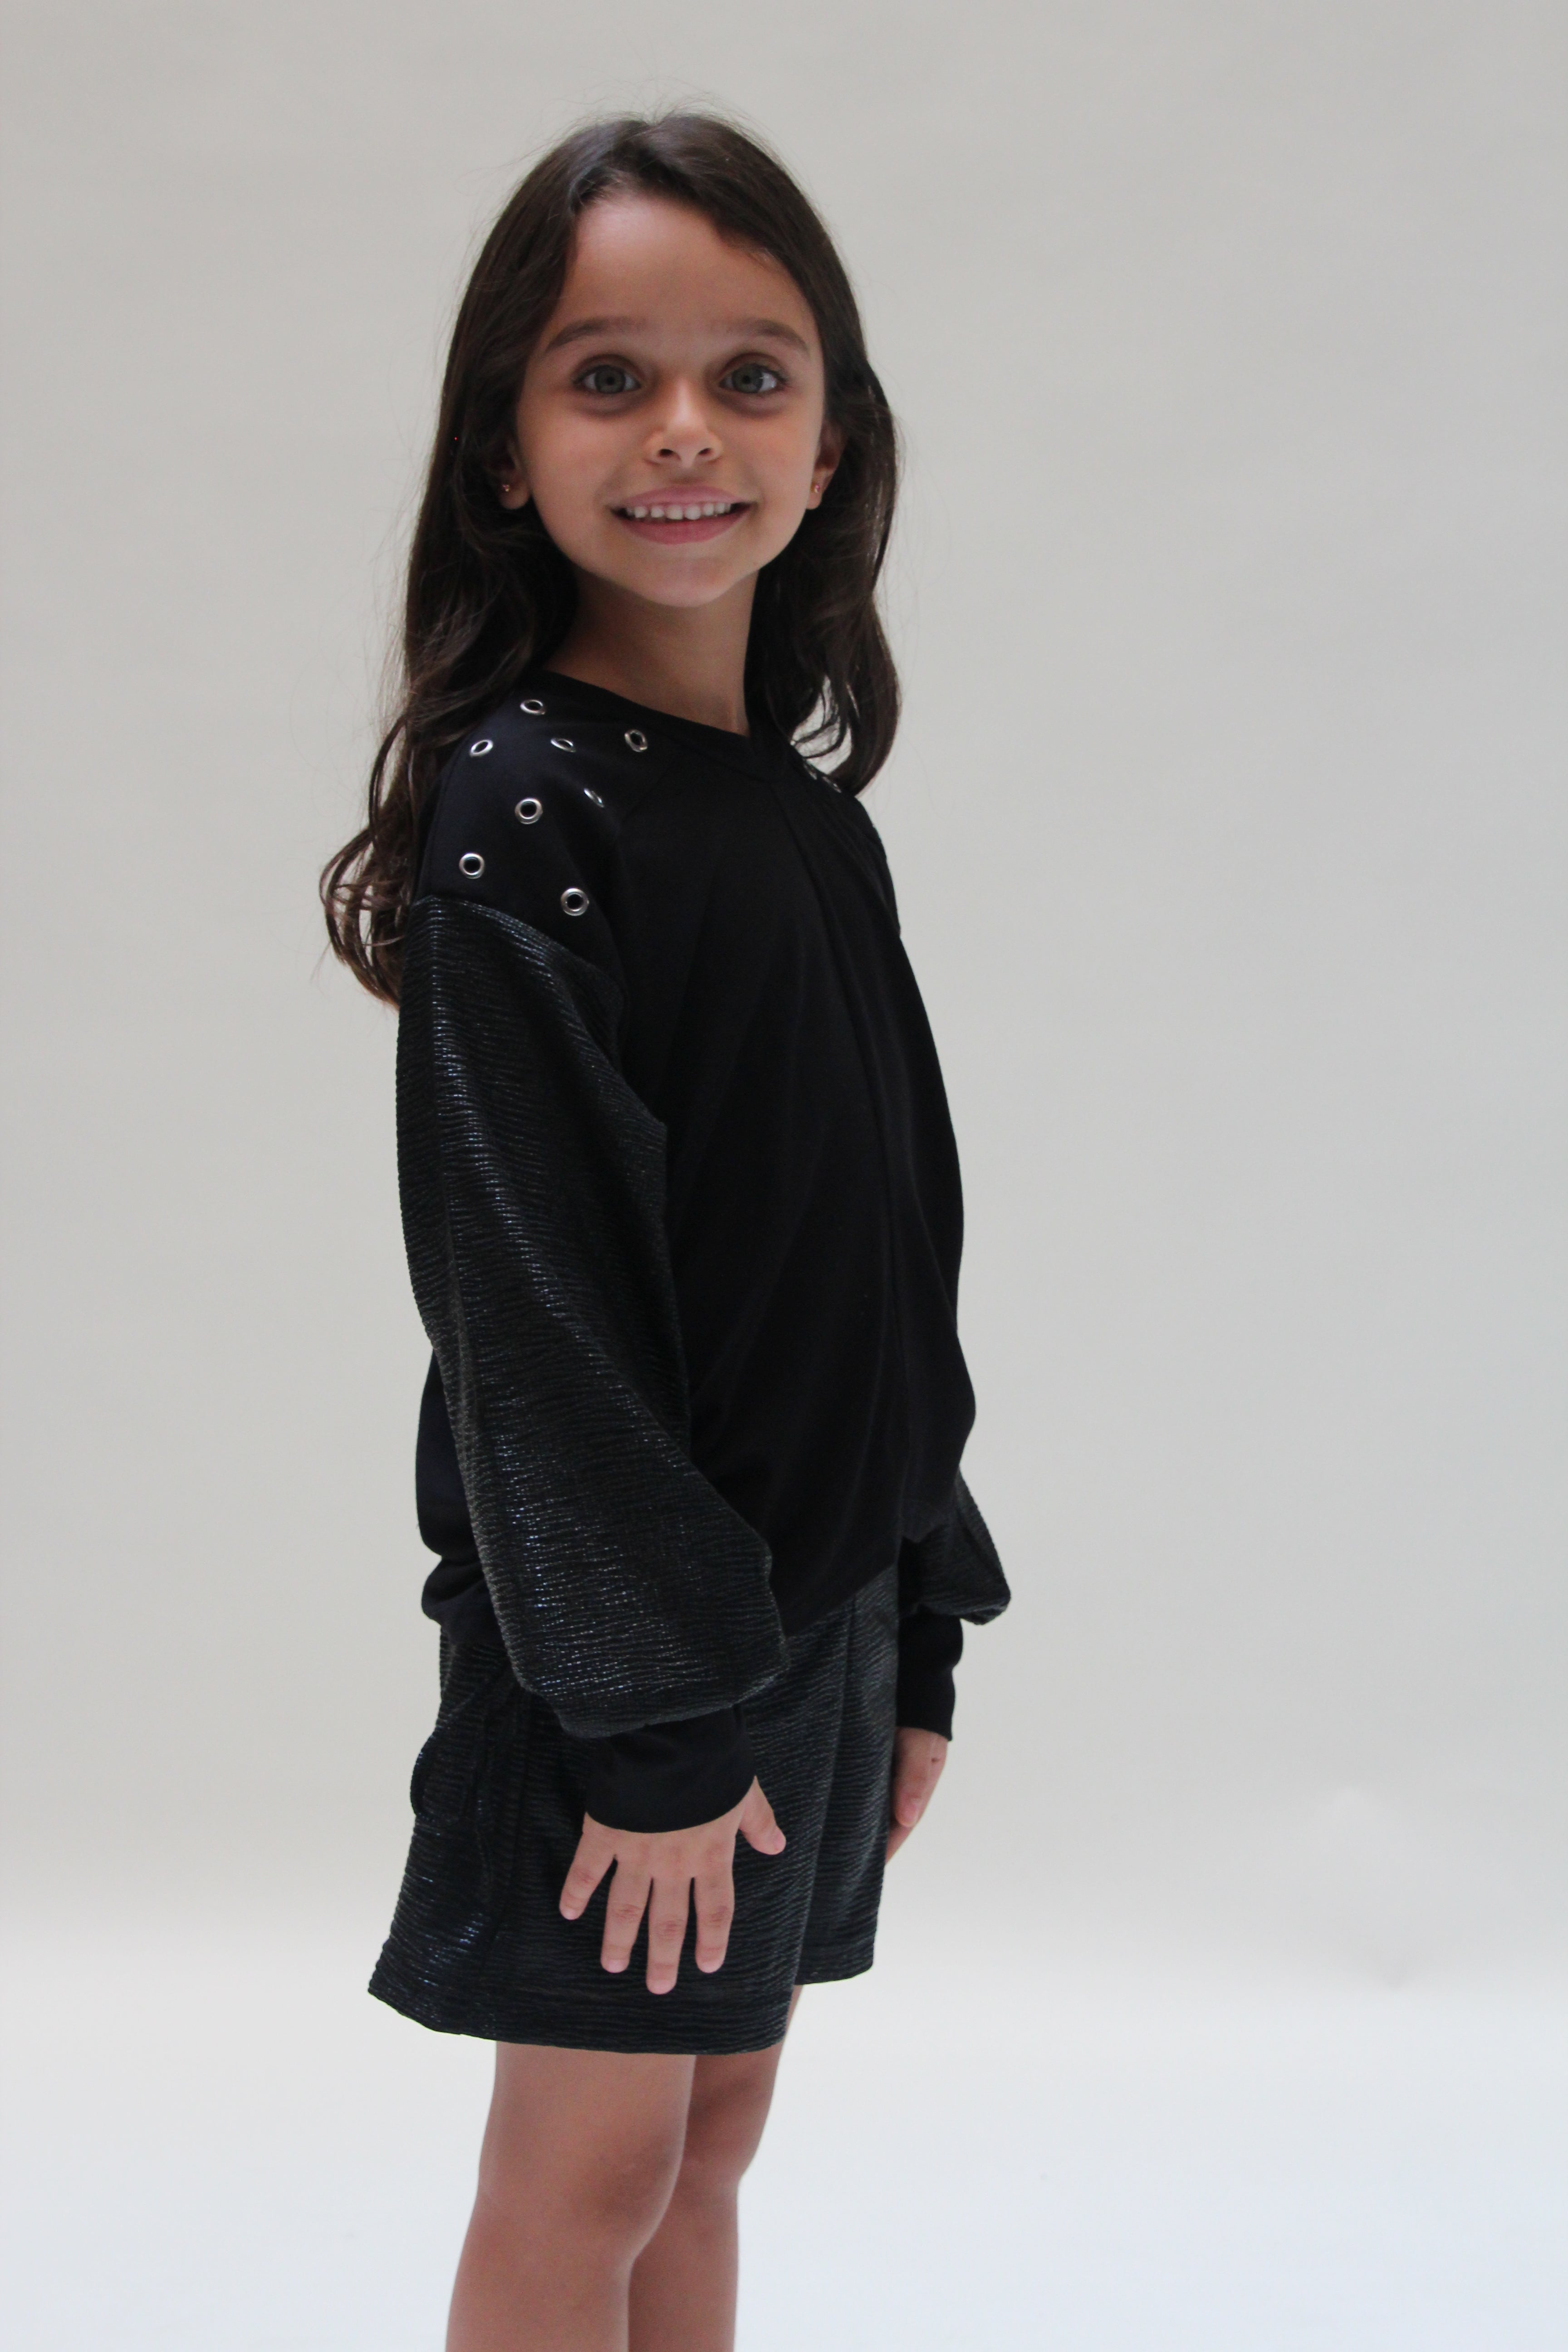 Studded Top with Shiny Sleeves For Girls - Black